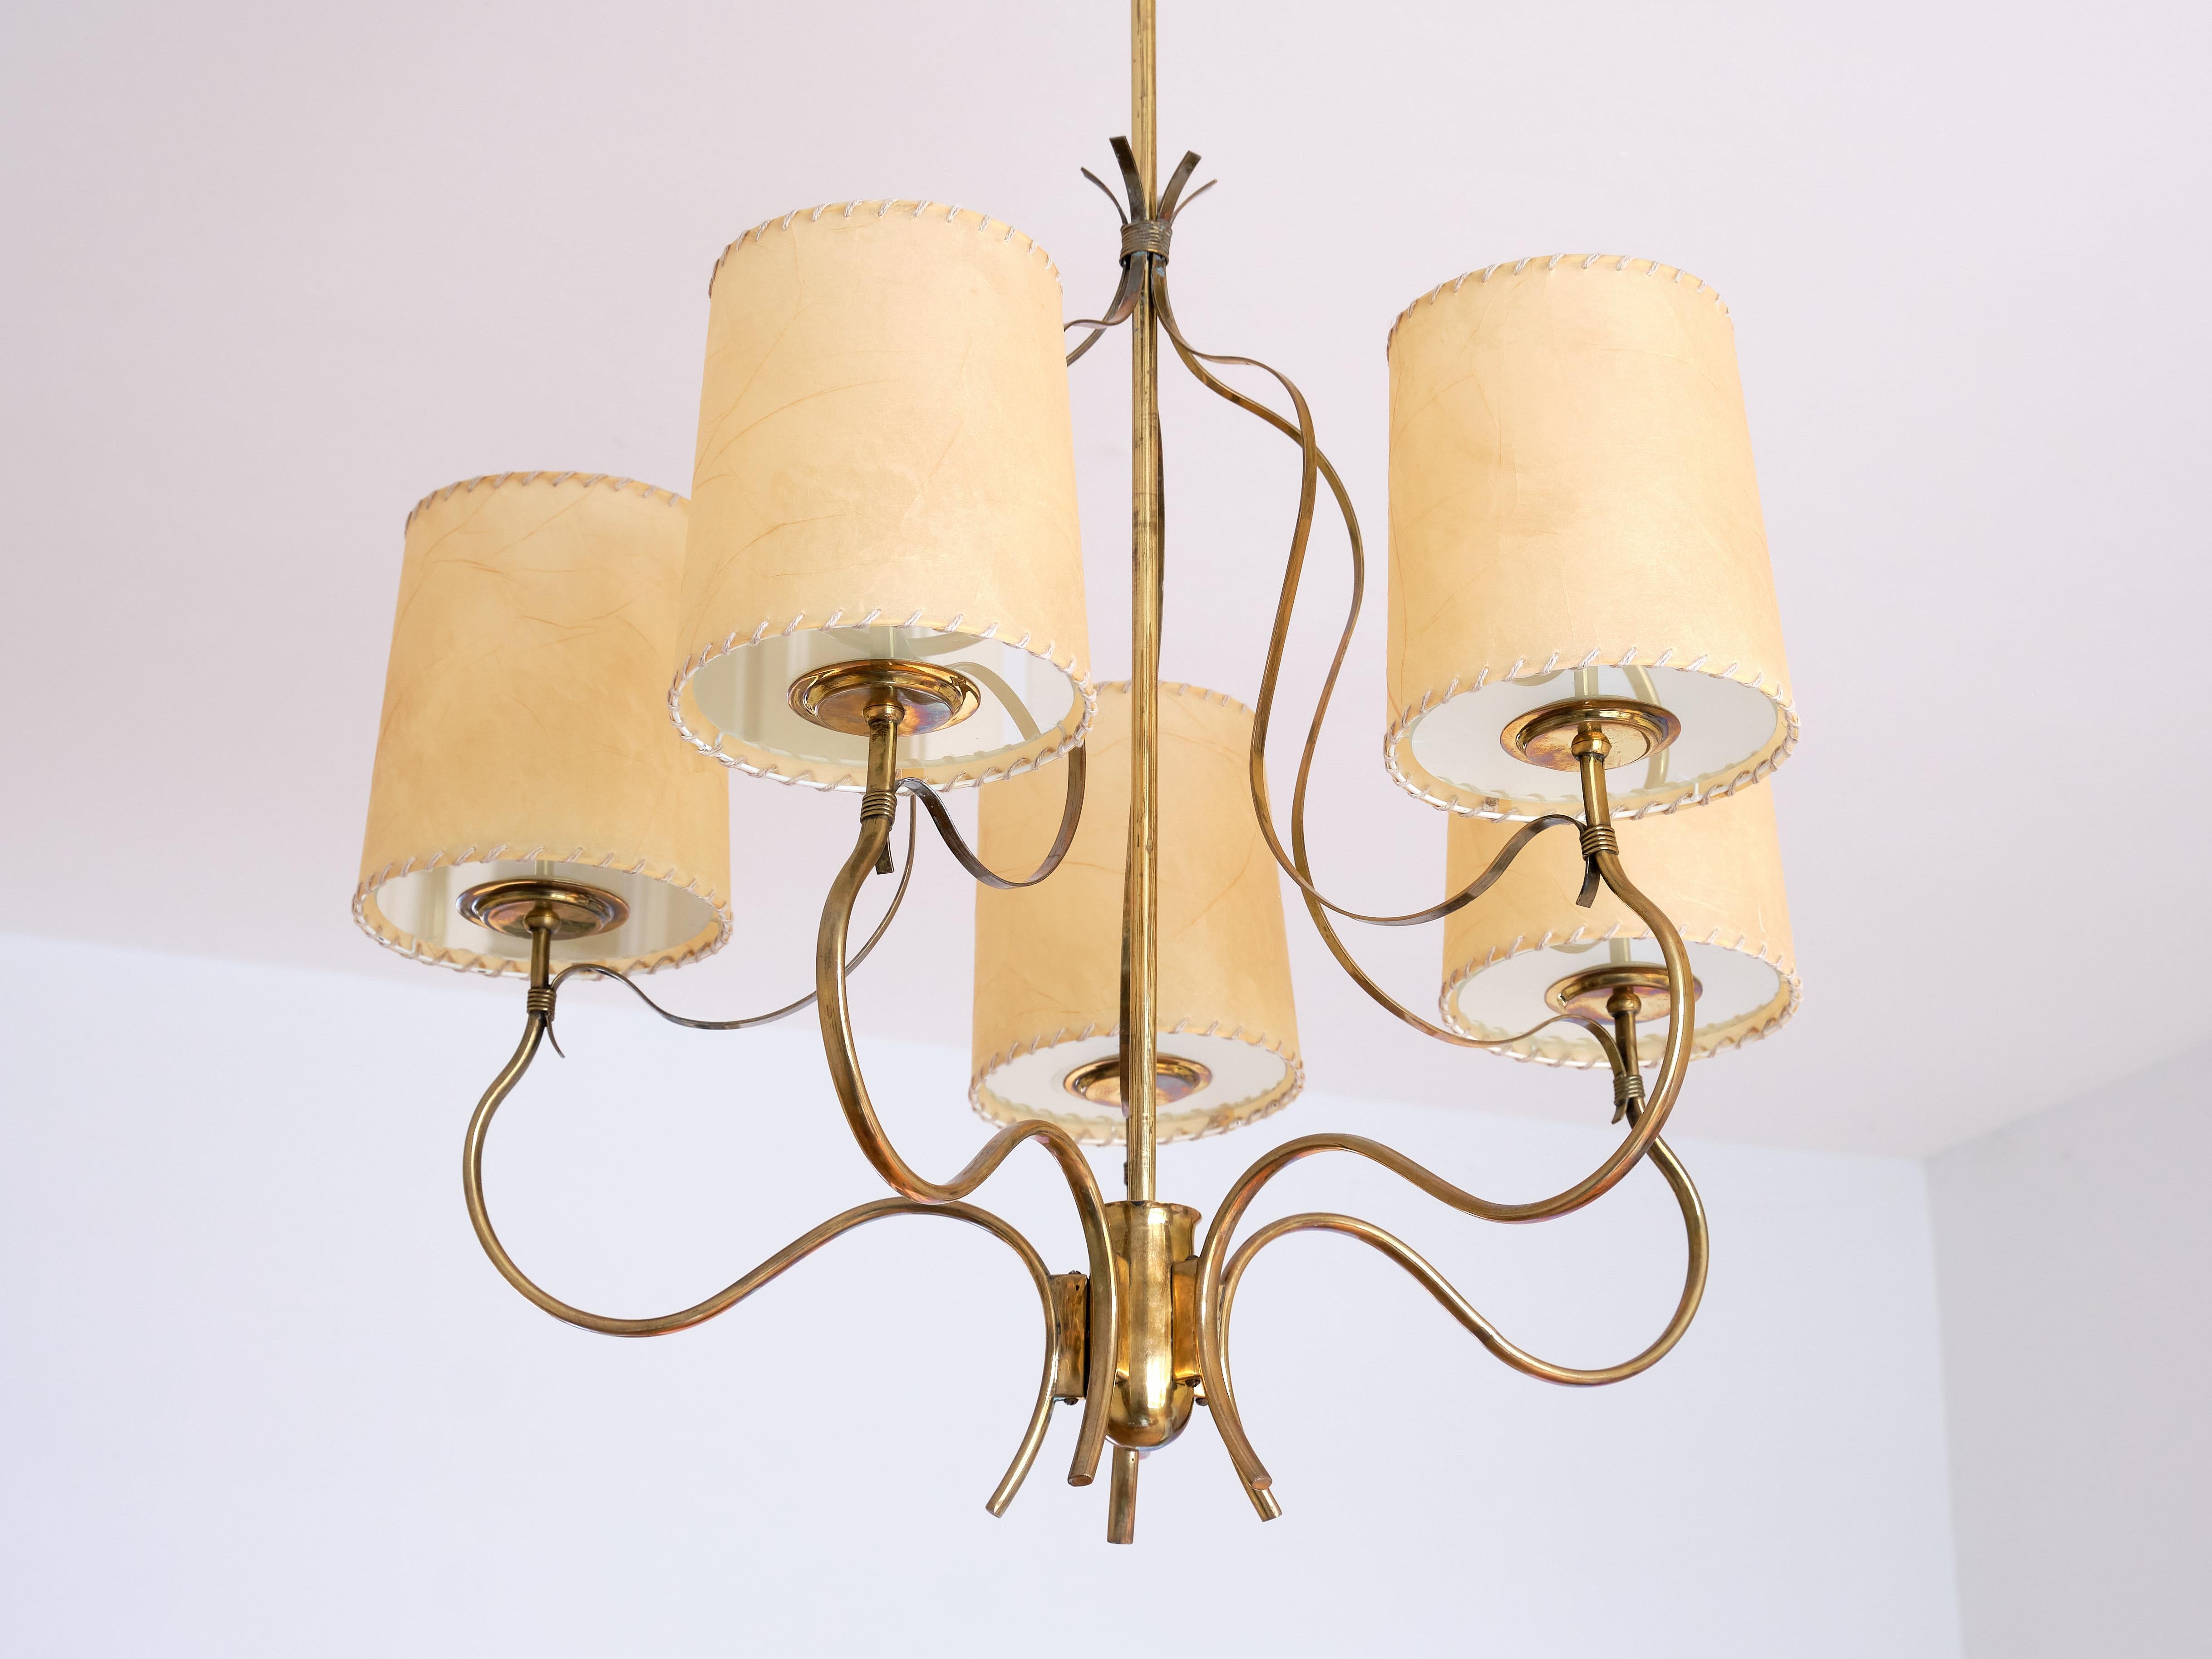 Finnish Paavo Tynell Chandelier in Brass and Parchment, Model 9001, Taito Finland, 1940s For Sale